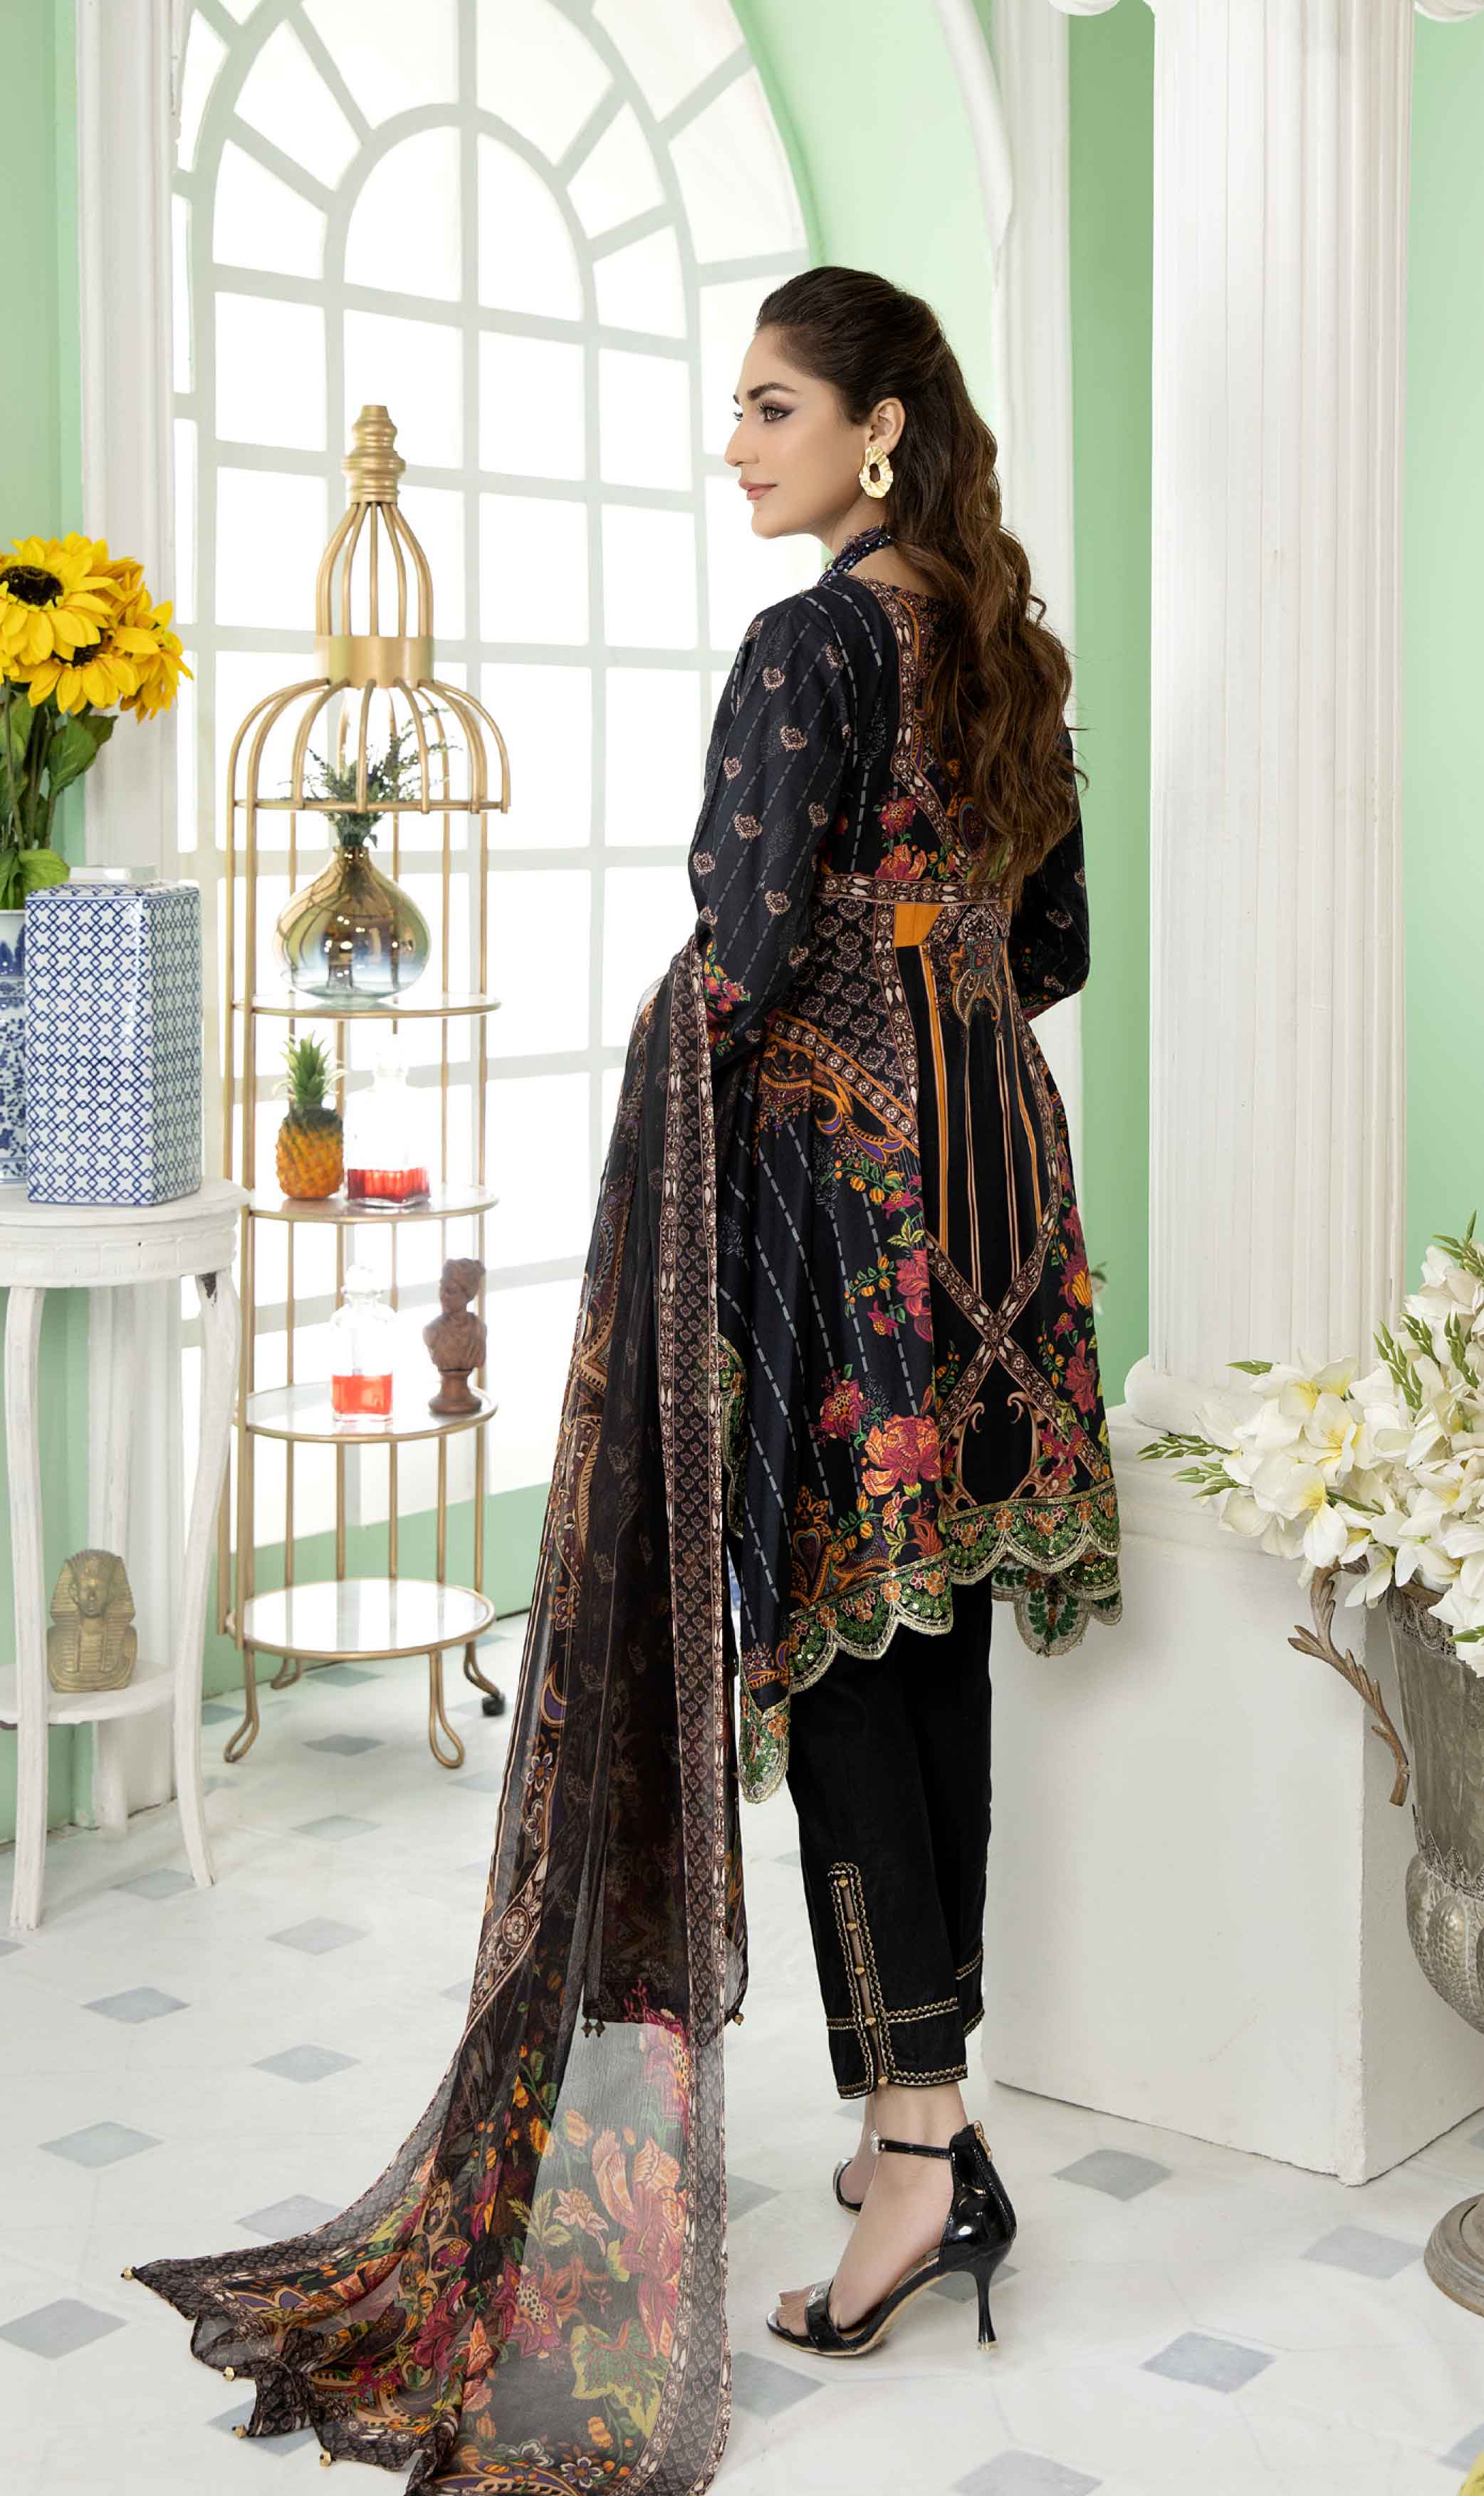 Arzoo Digital Print Frock Outfit with Embroidered Trousers SL19 DesiP